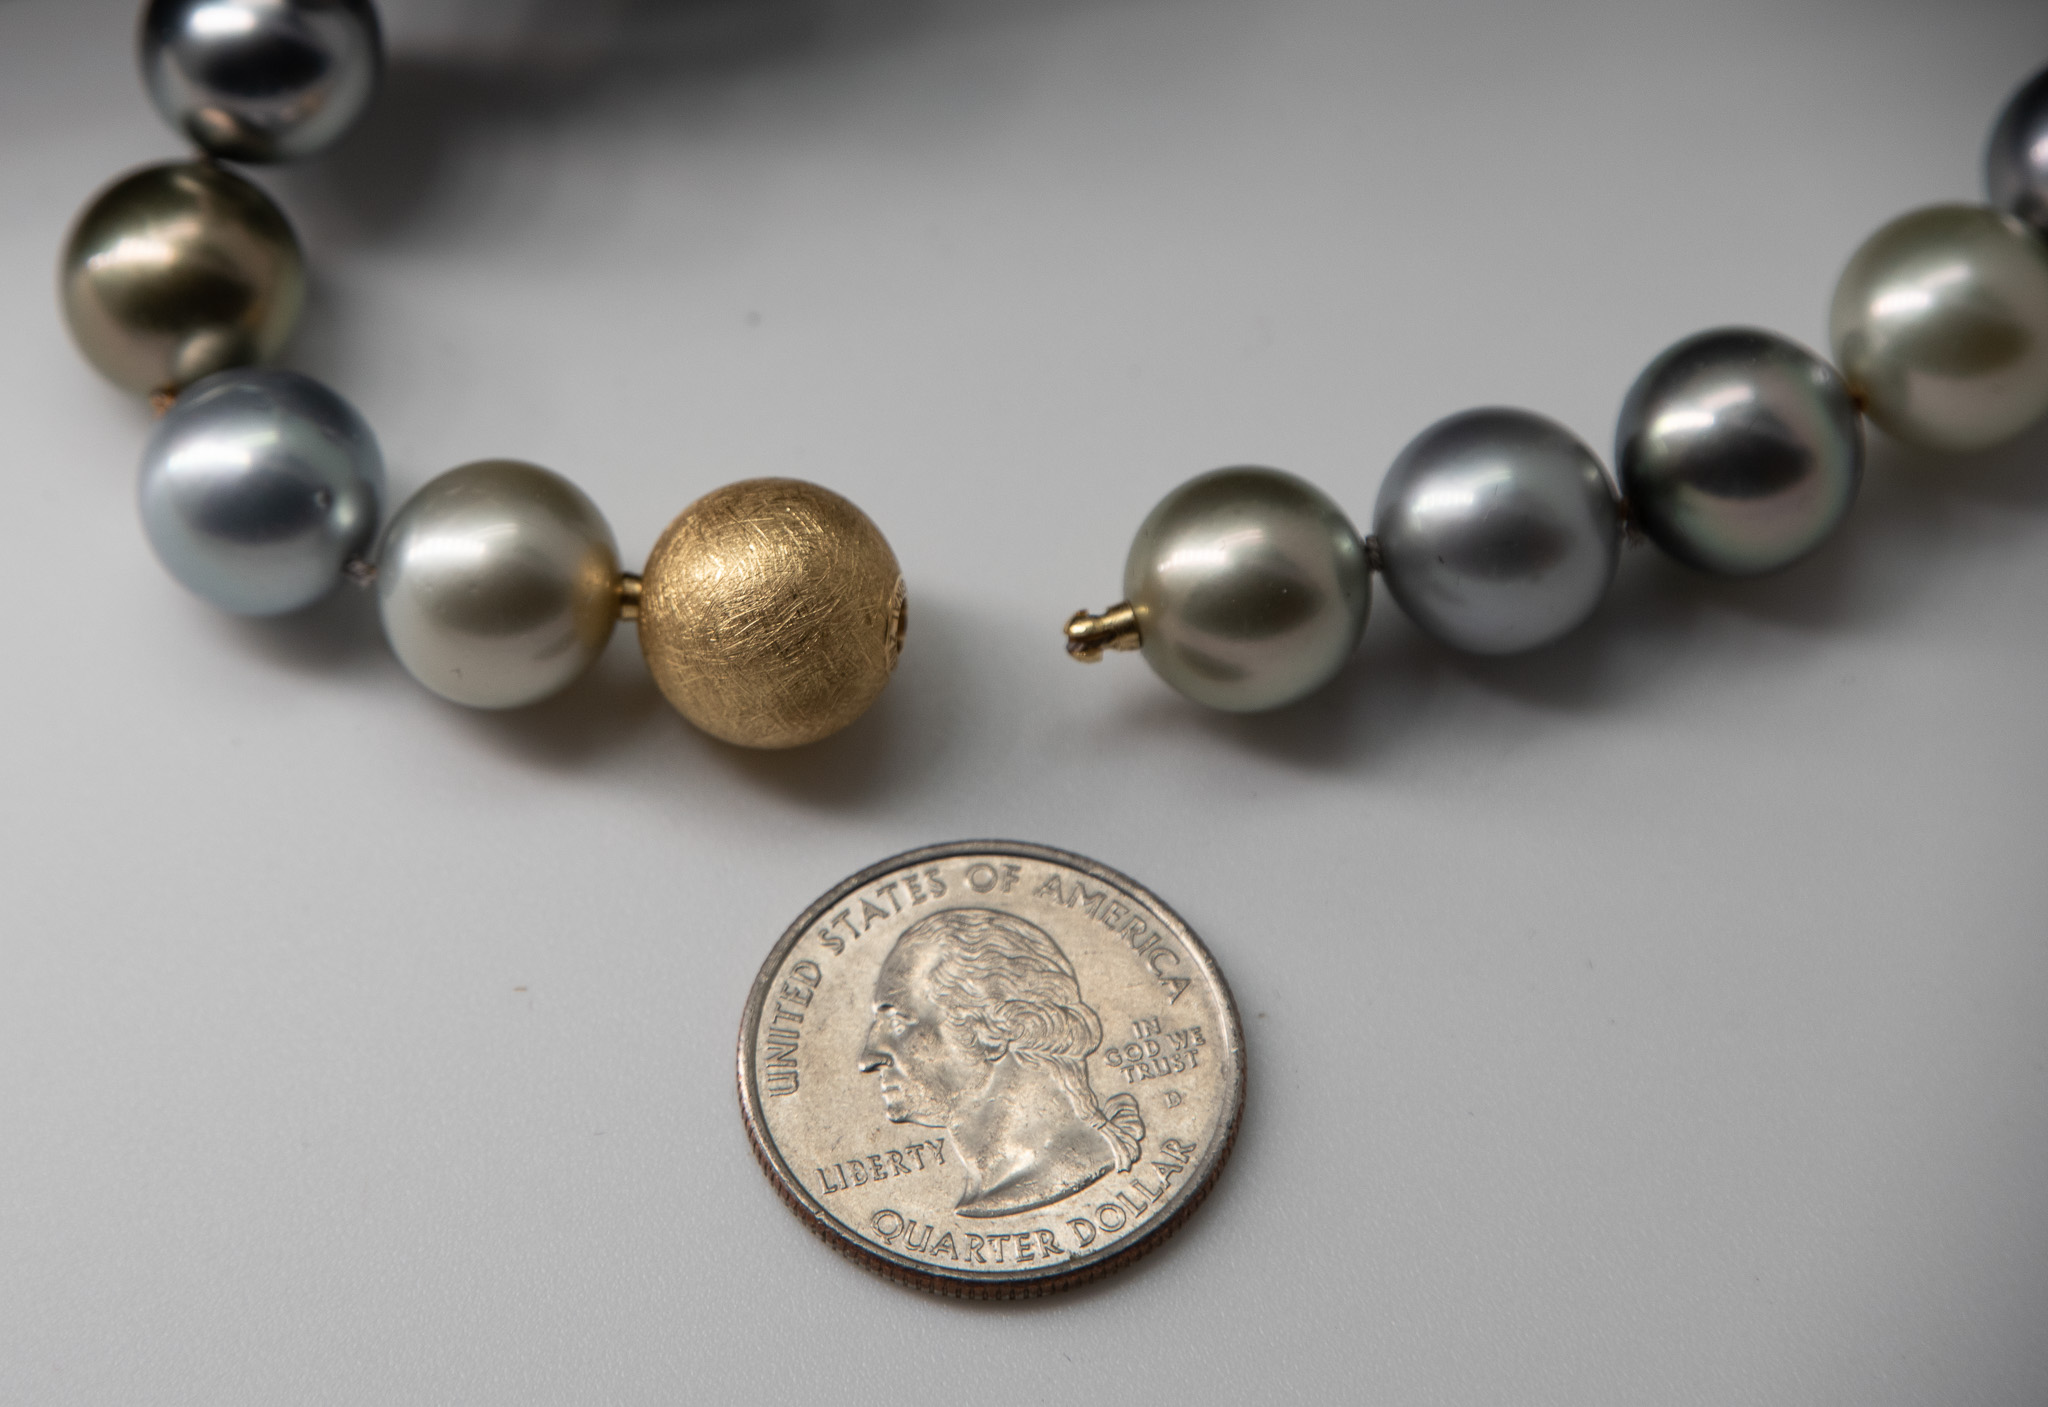 'Opera Night" Tahitian pearl opera-length necklace showing closeup of 18K gold Jorg Heinz tube and key clasp with US quarter coin for scale